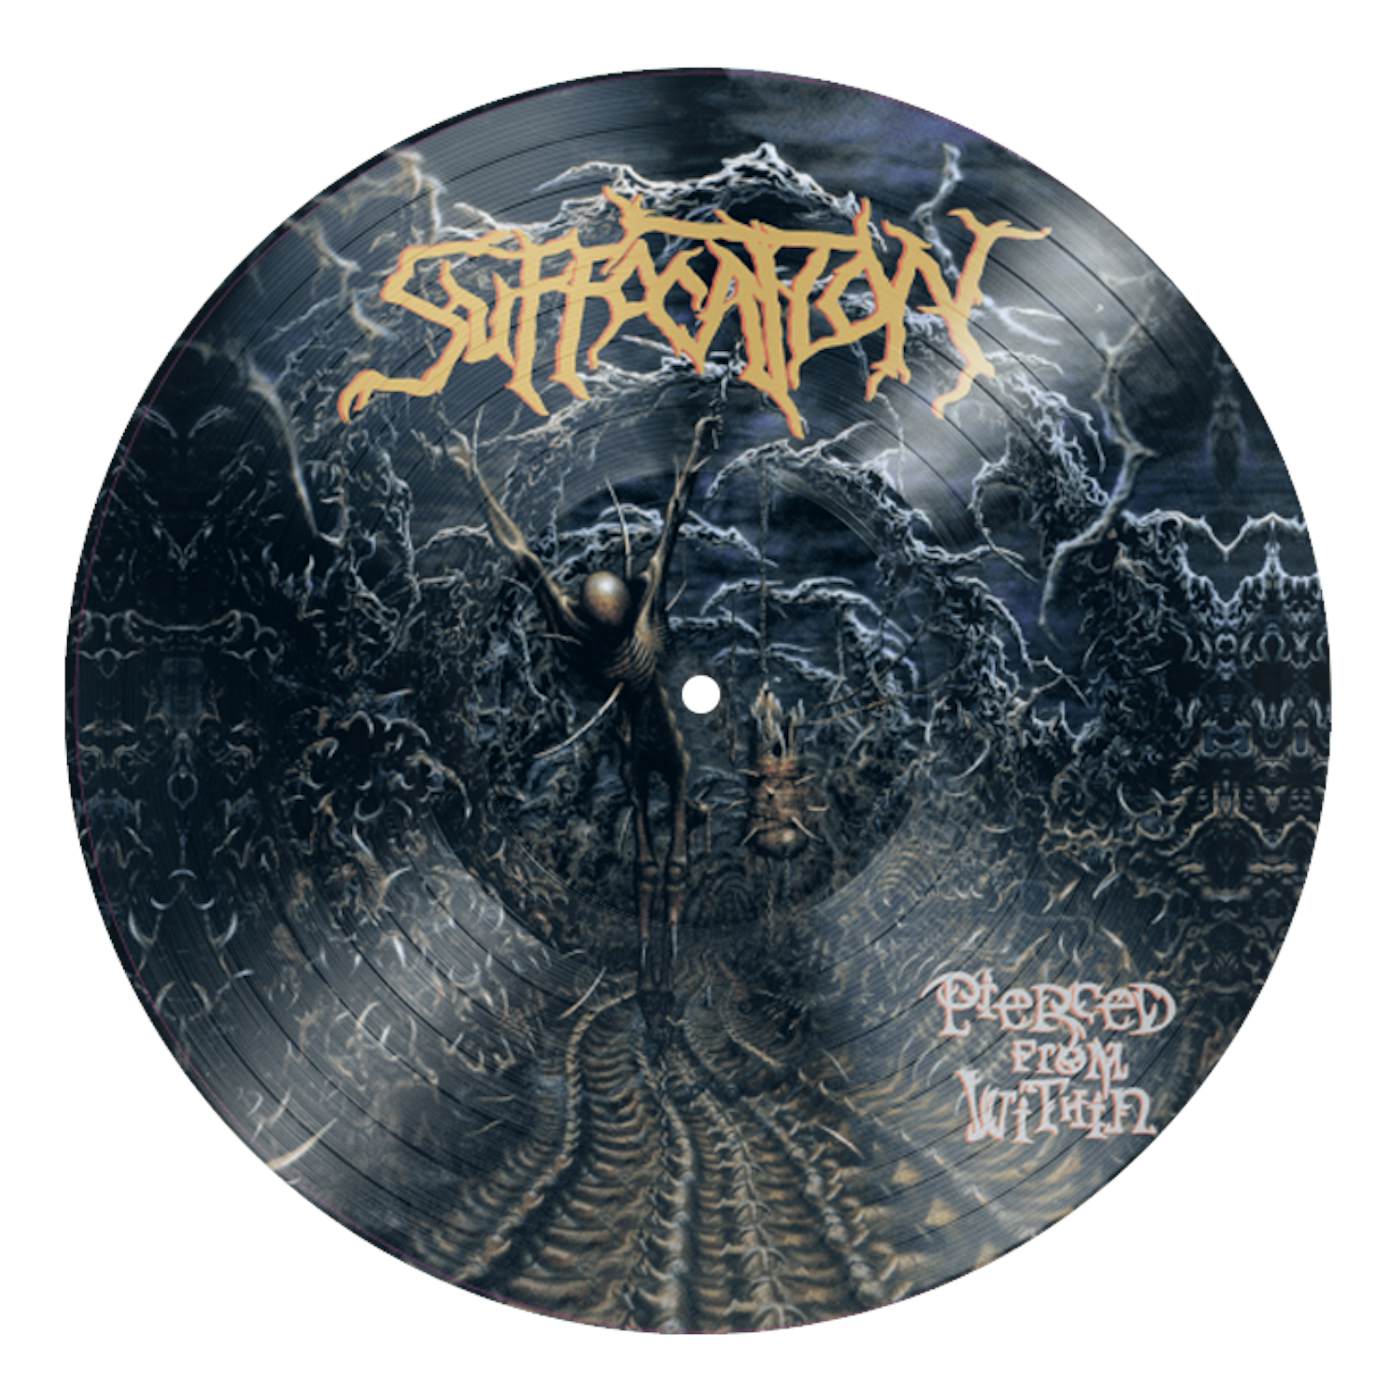 SUFFOCATION - 'Pierced From Within' LP Picture Disc (Vinyl)